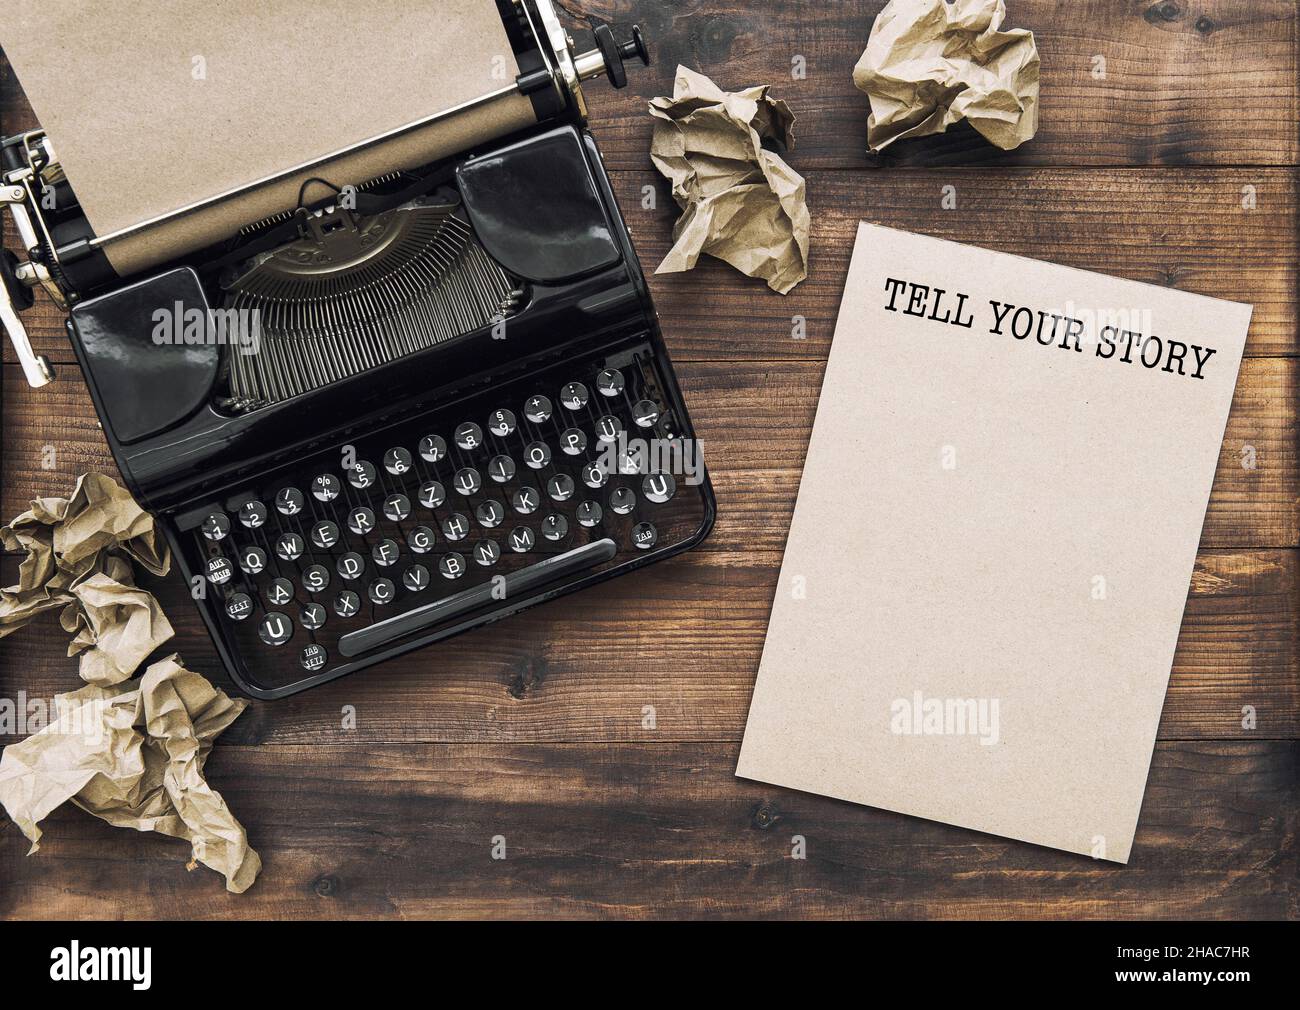 Antique typewriter and paper notebook. Tell Your Story. Creativity concept Stock Photo